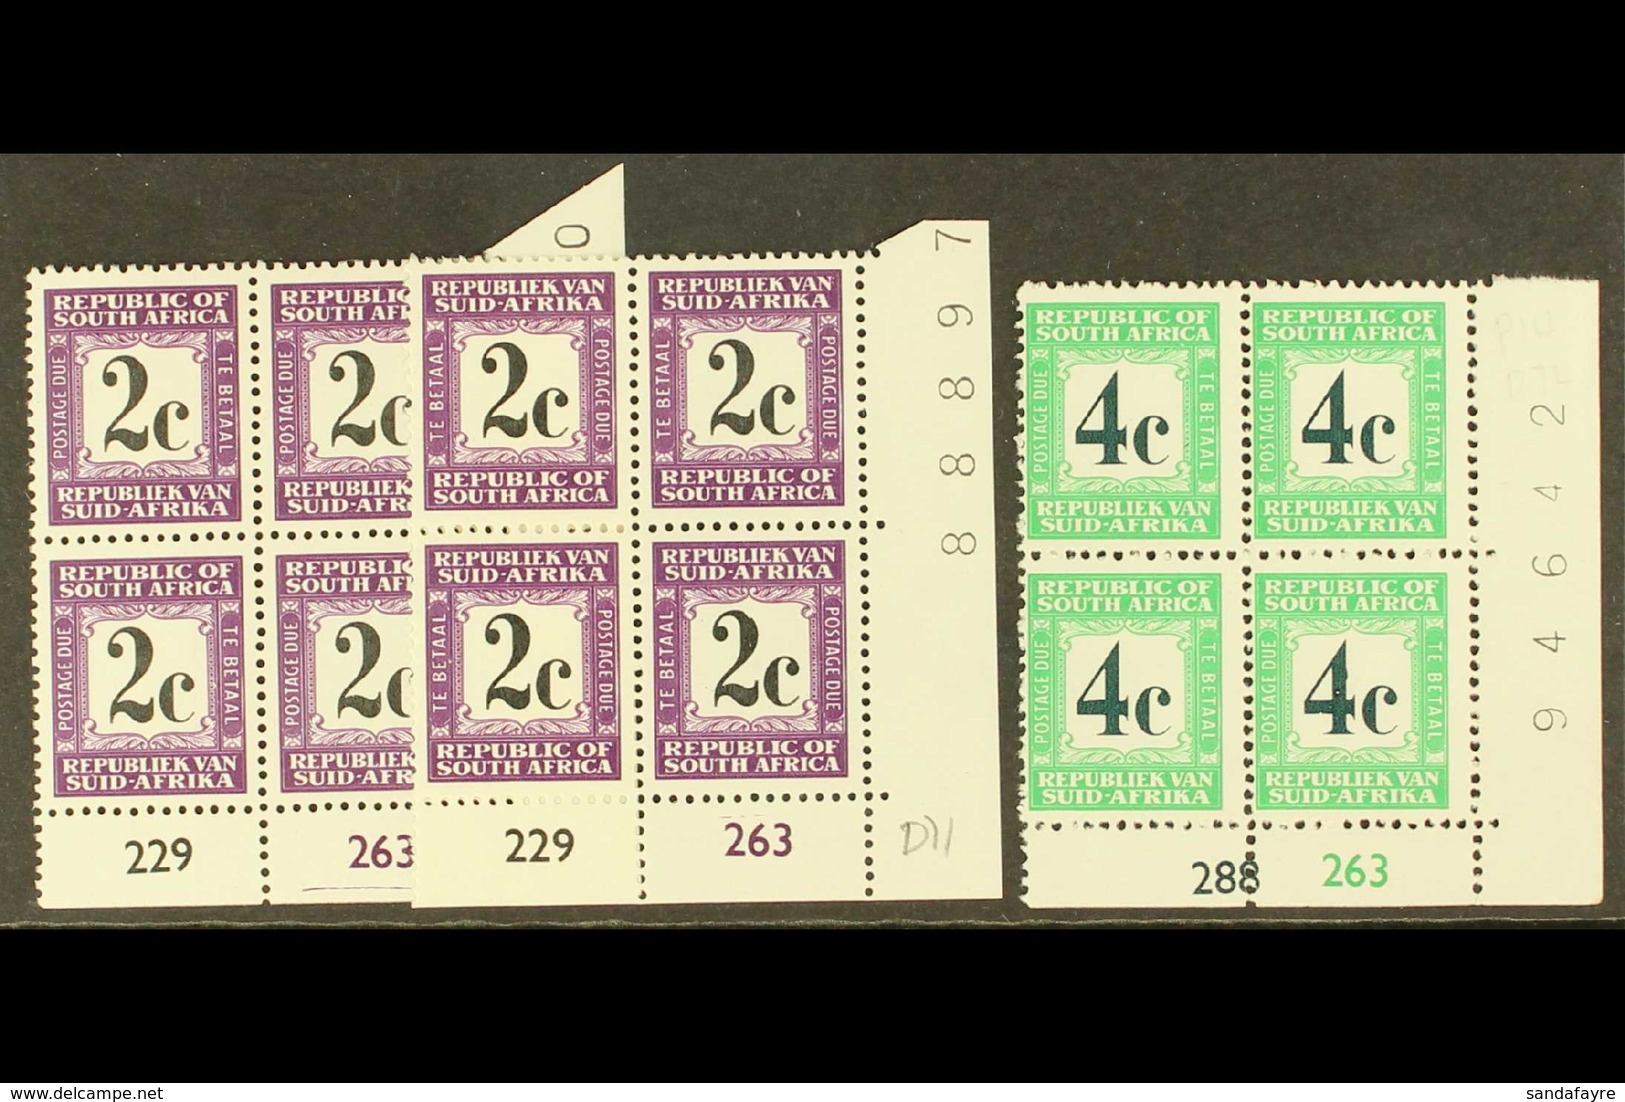 POSTAGE DUES 1971 2c Both Languages & 4c Perf.14 Issues, CYLINDER BLOCKS OF FOUR, SG D71/4, 4c Few Split Perfs, Otherwis - Unclassified